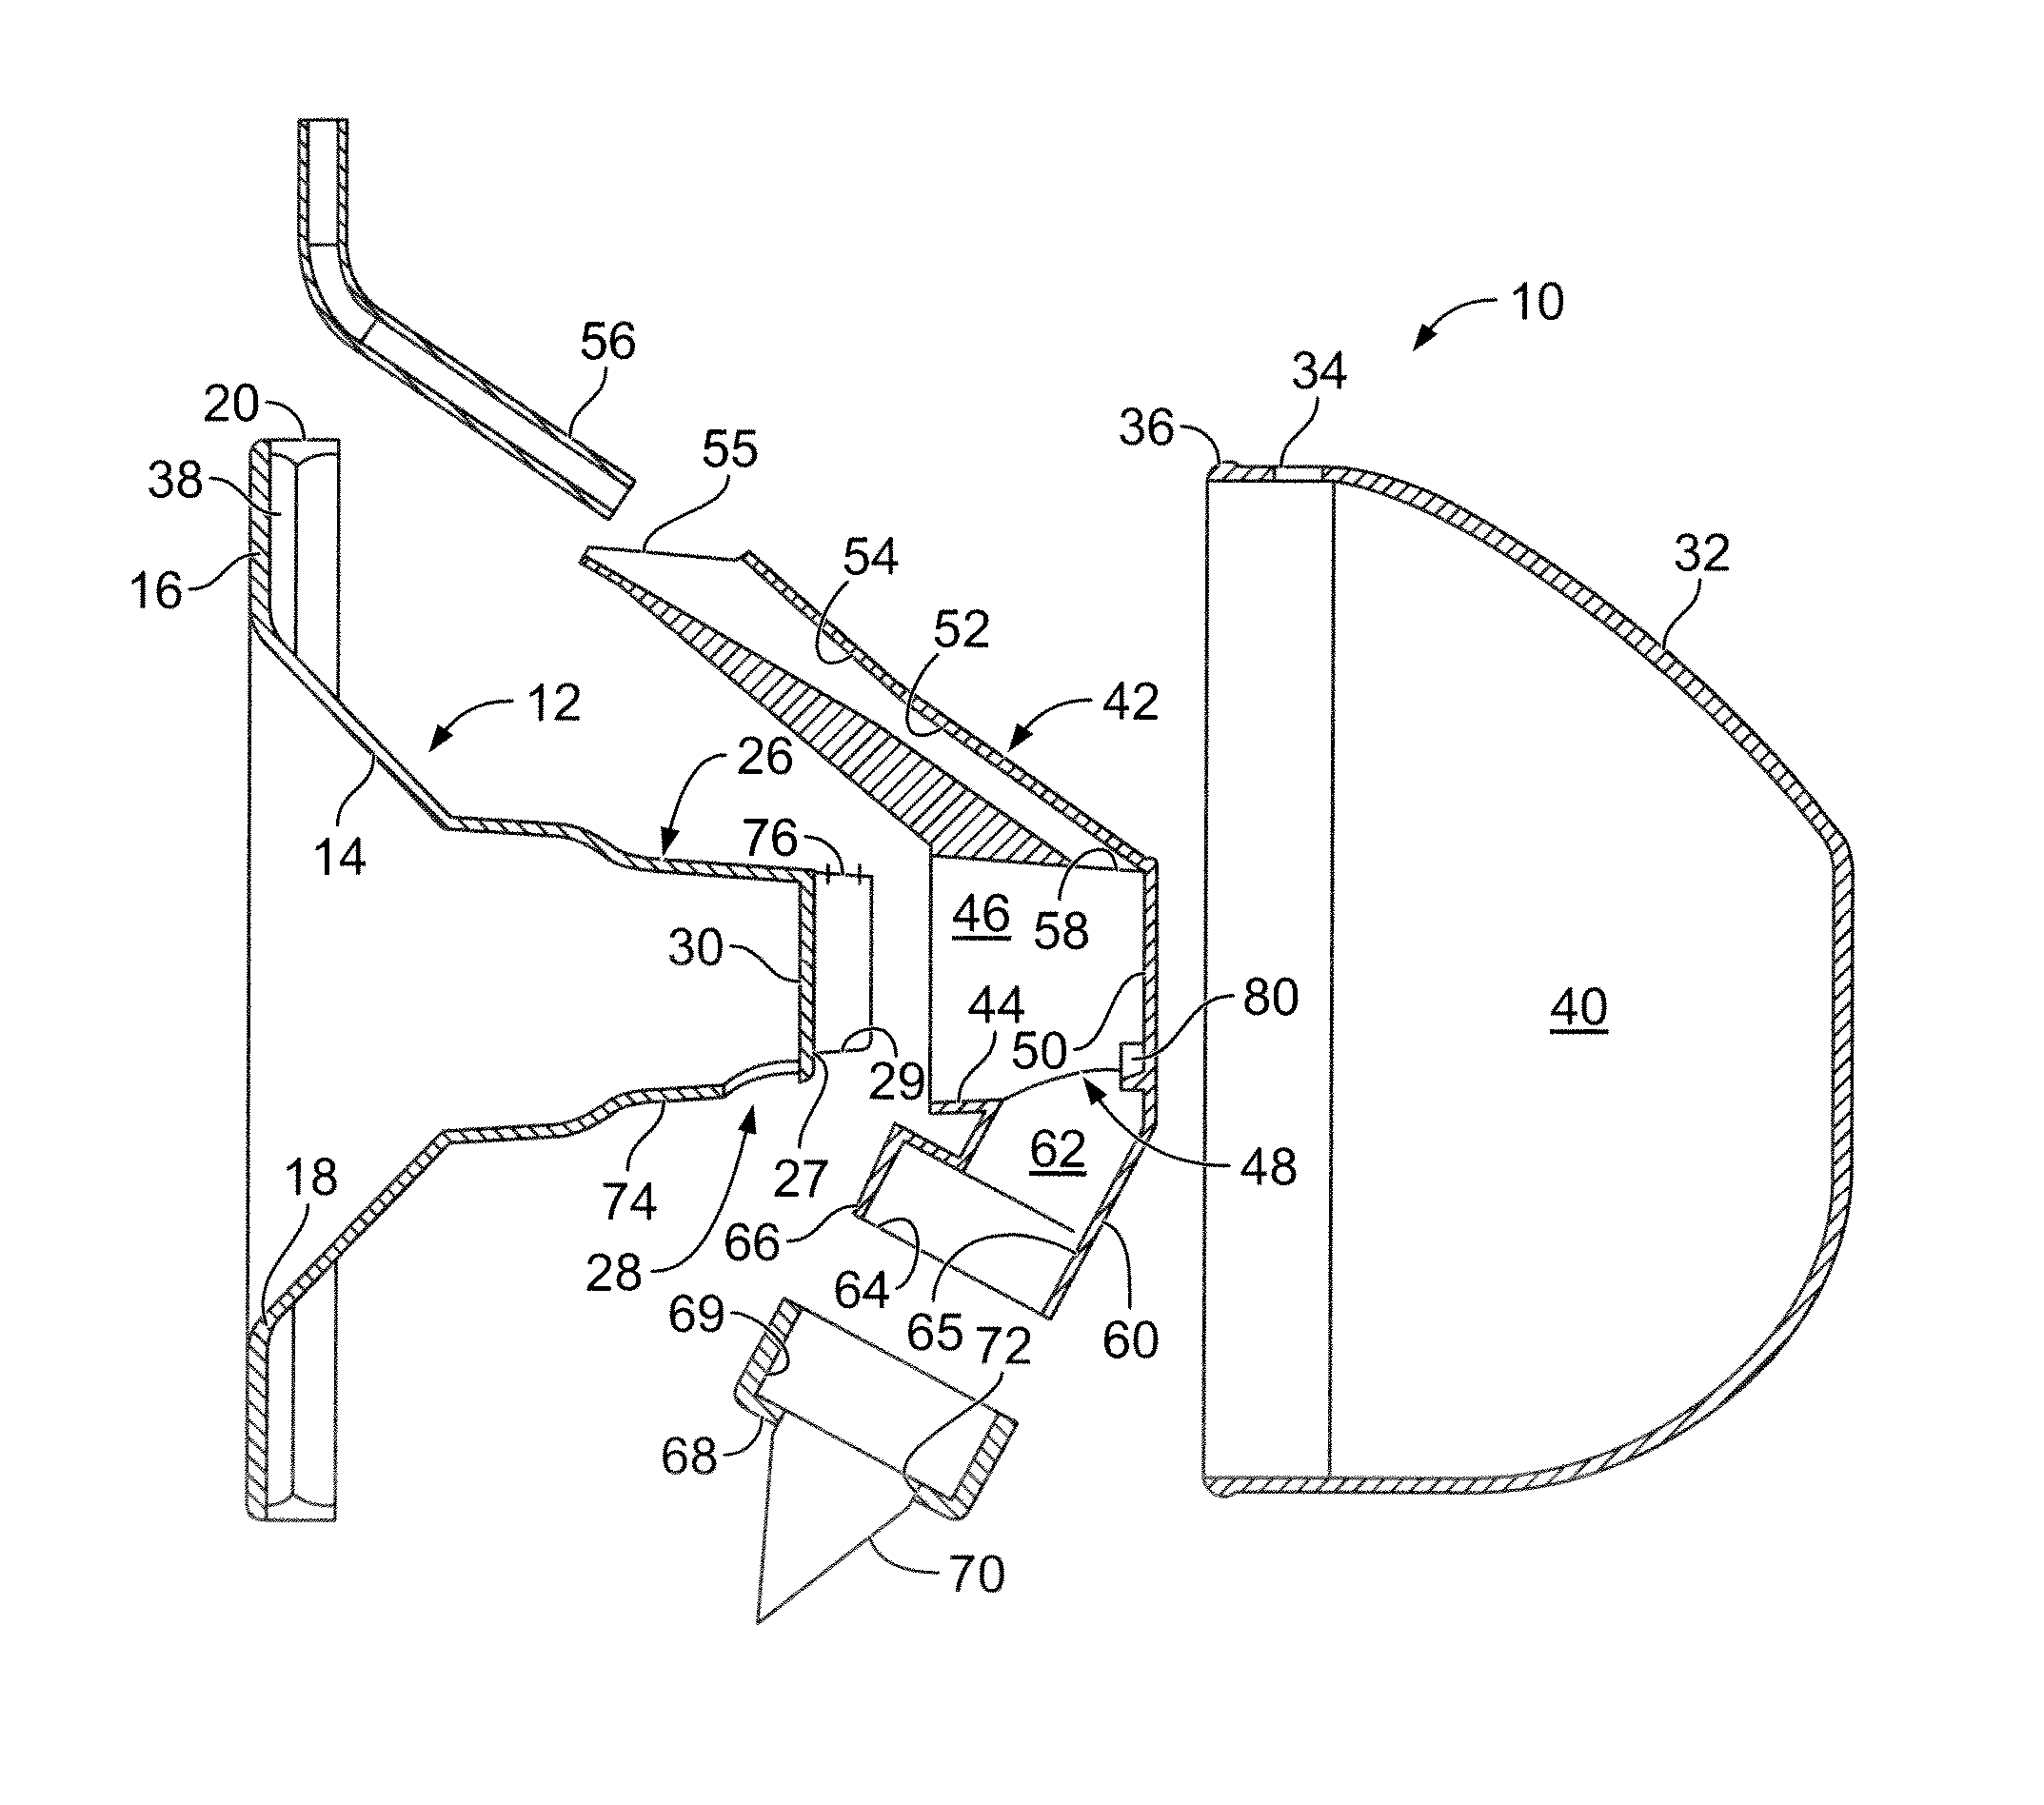 Submersible valve for a breast milk collection device with self contained reservoir